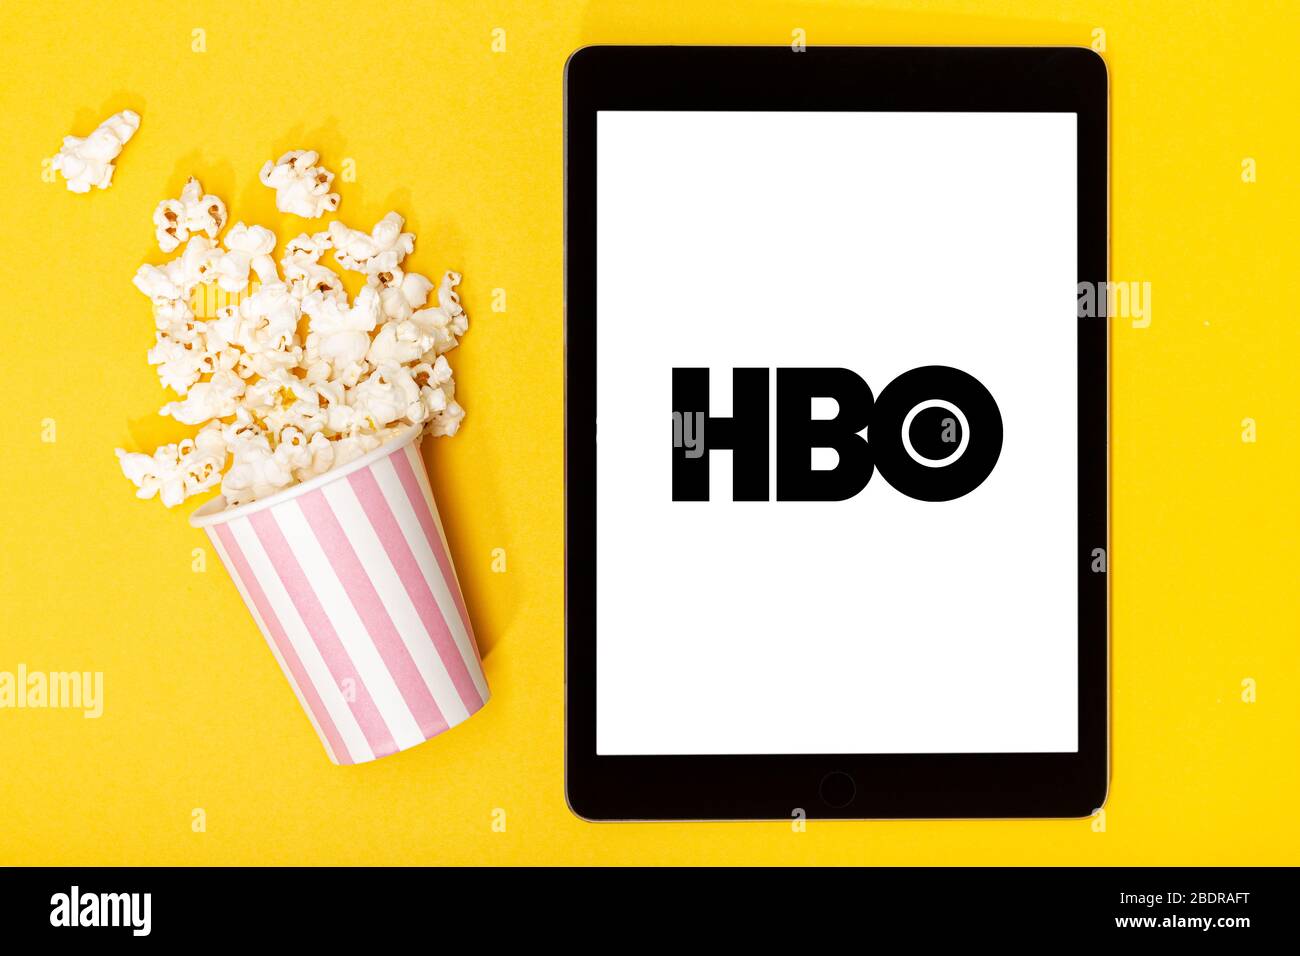 Galicia, Spain. March 9, 2020; Popcorn bucket and tablet with HBO logo on yellow background. Top view Stock Photo